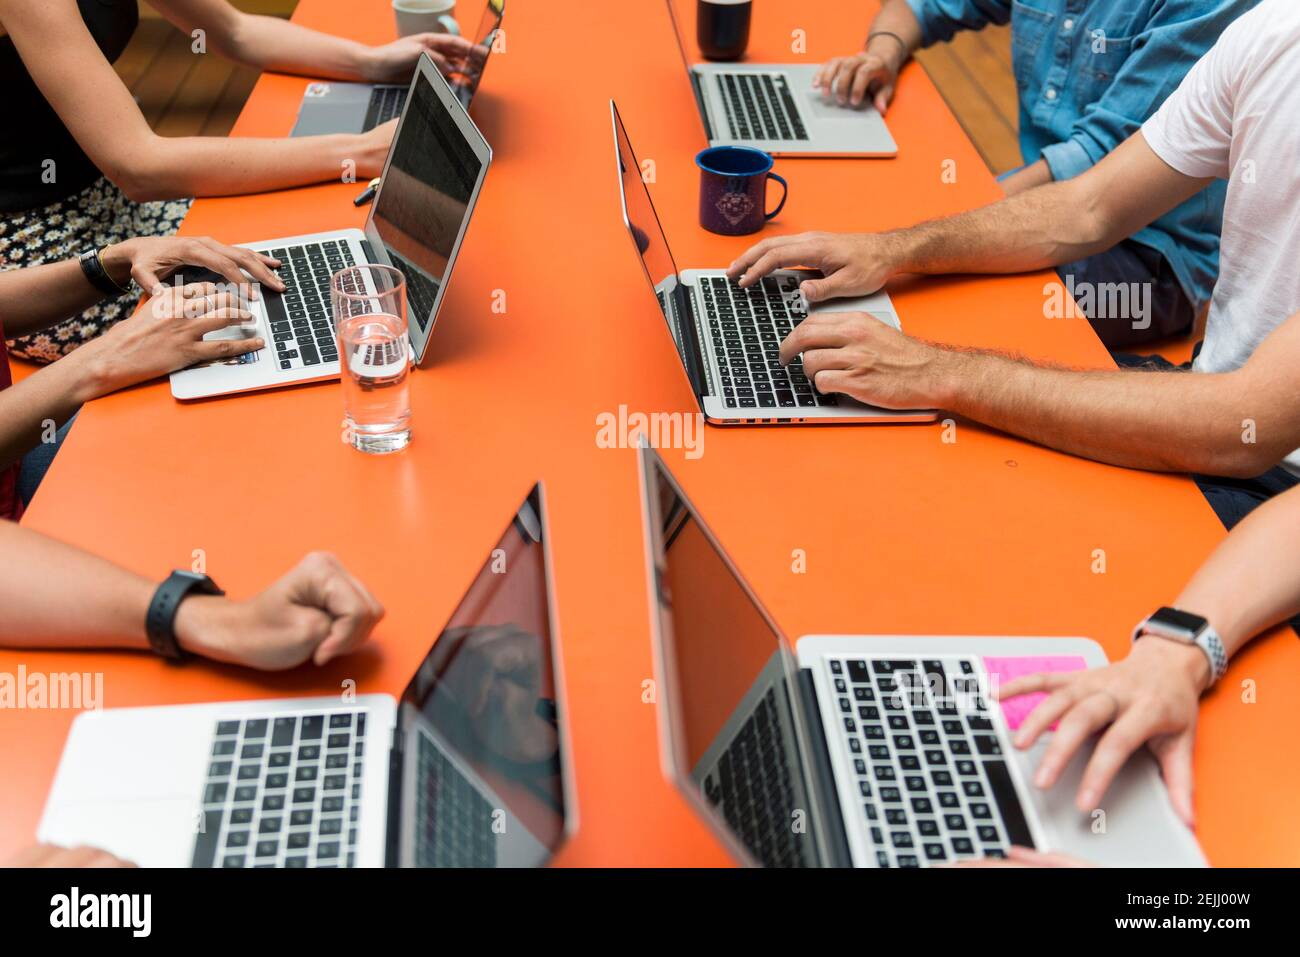 Six people sat around a bright orange table in a meeting while working on the laptop computers Stock Photo